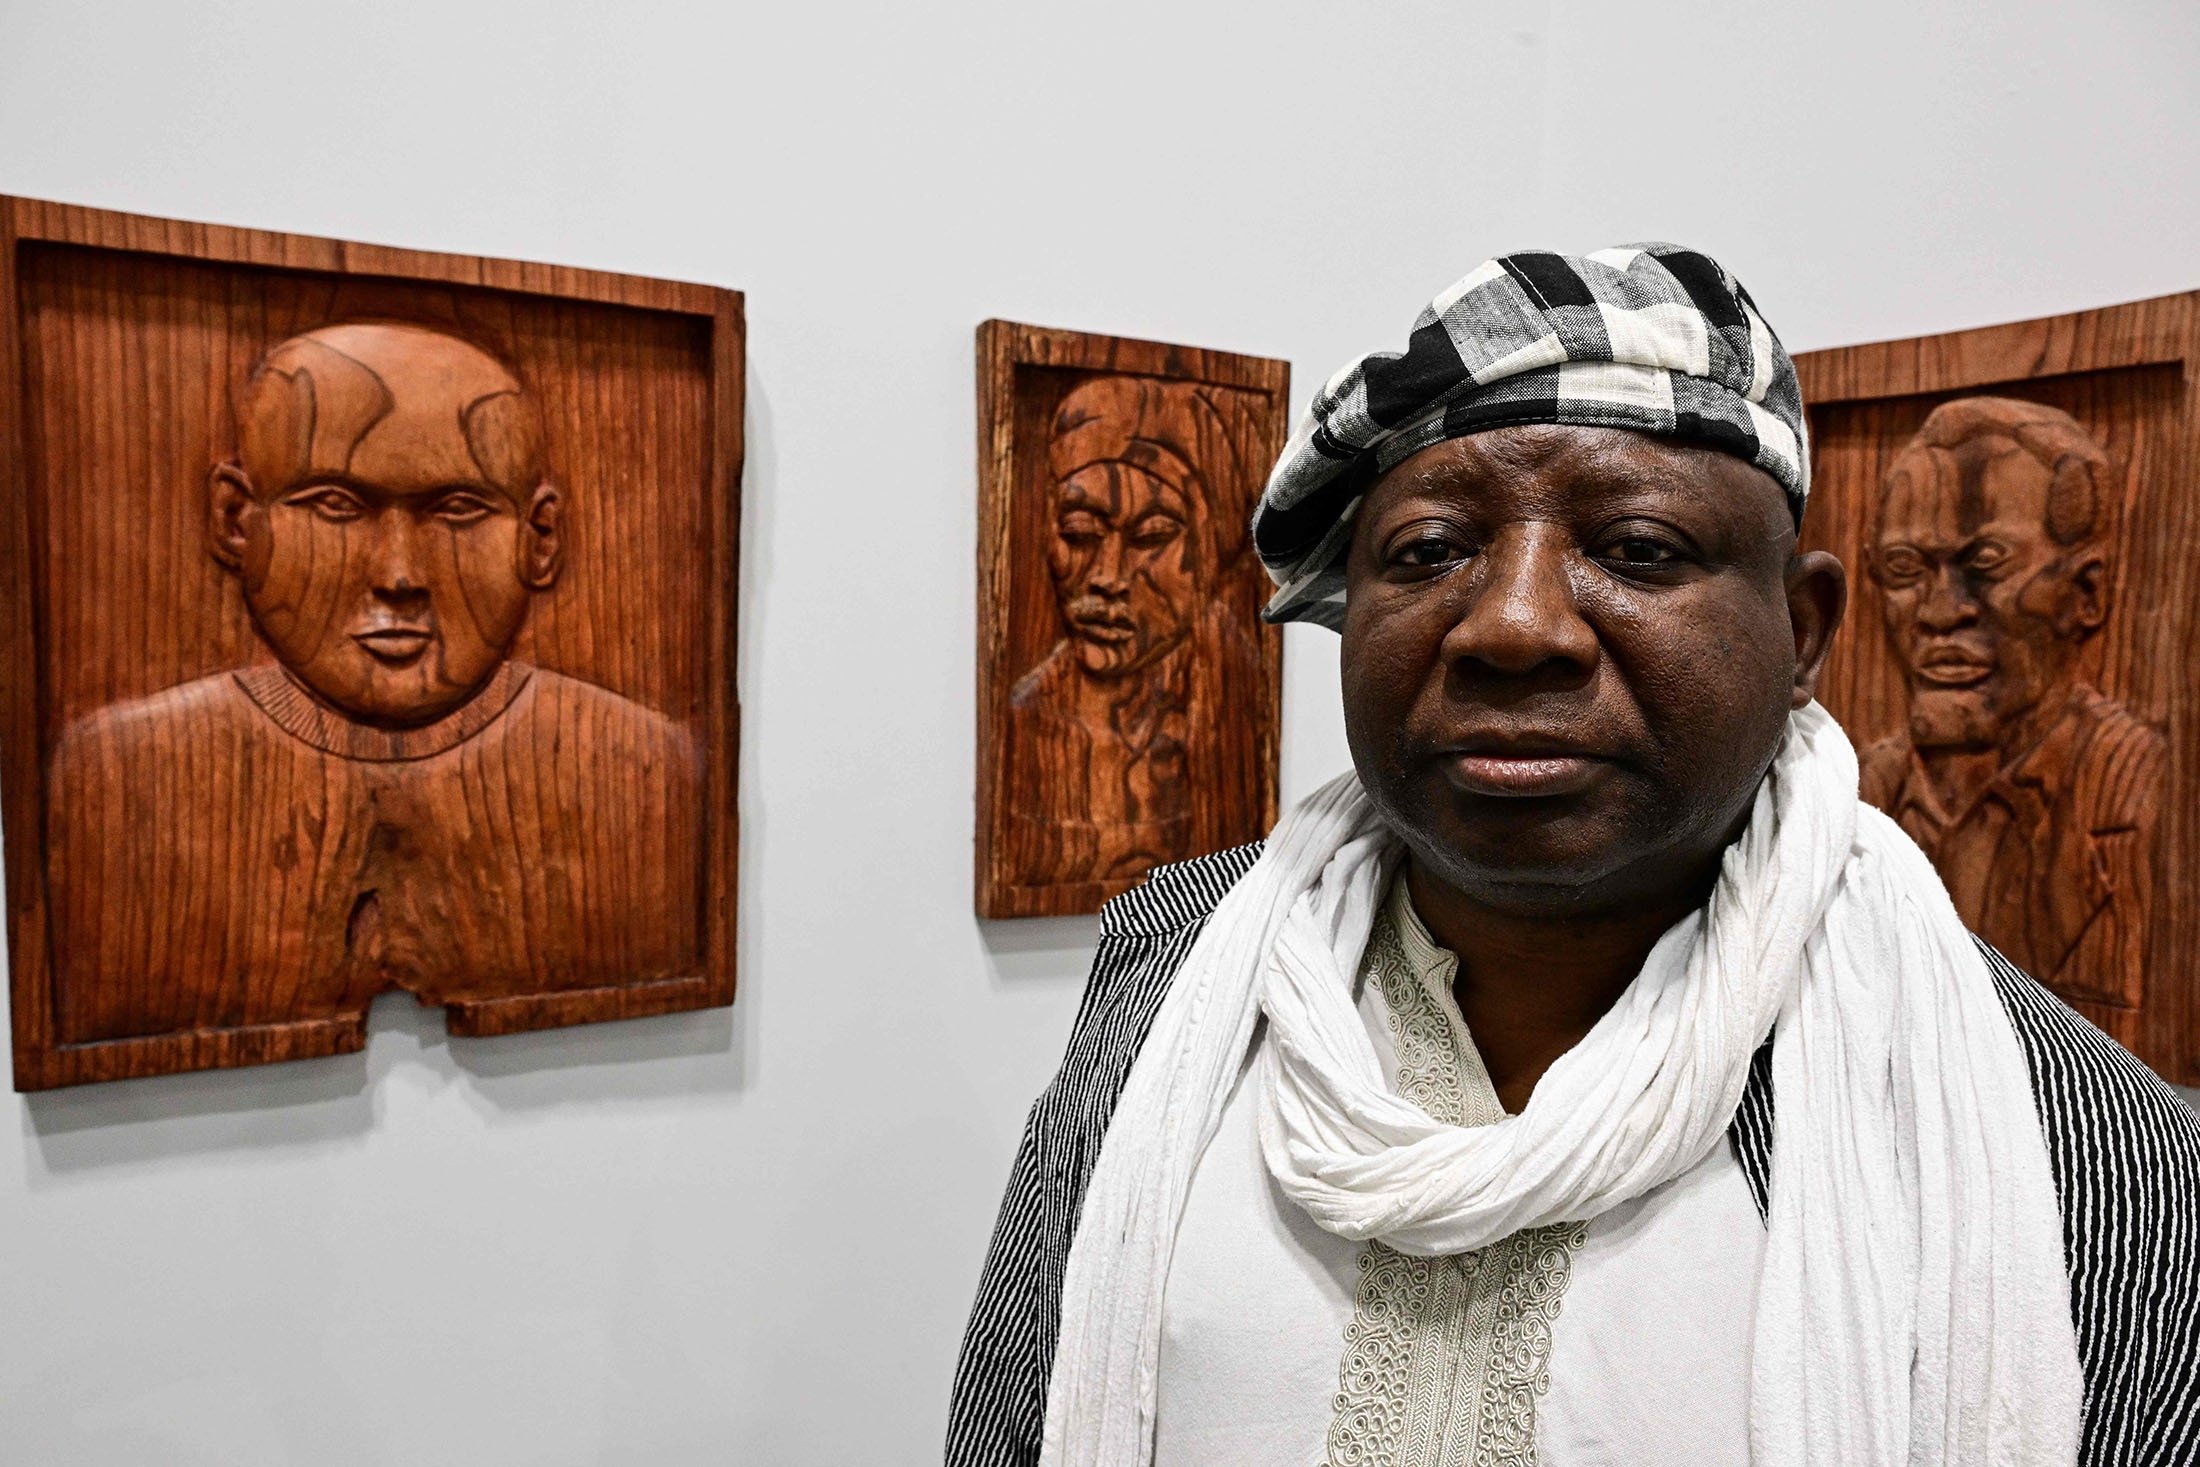 Cameroonian artist Barthelemy Togo poses by his artwork "Bilongue" during a preview day of Art Basel, the world's premier modern and contemporary art fair in Basel, Switzerland, June 14, 2022. (AFP Photo)